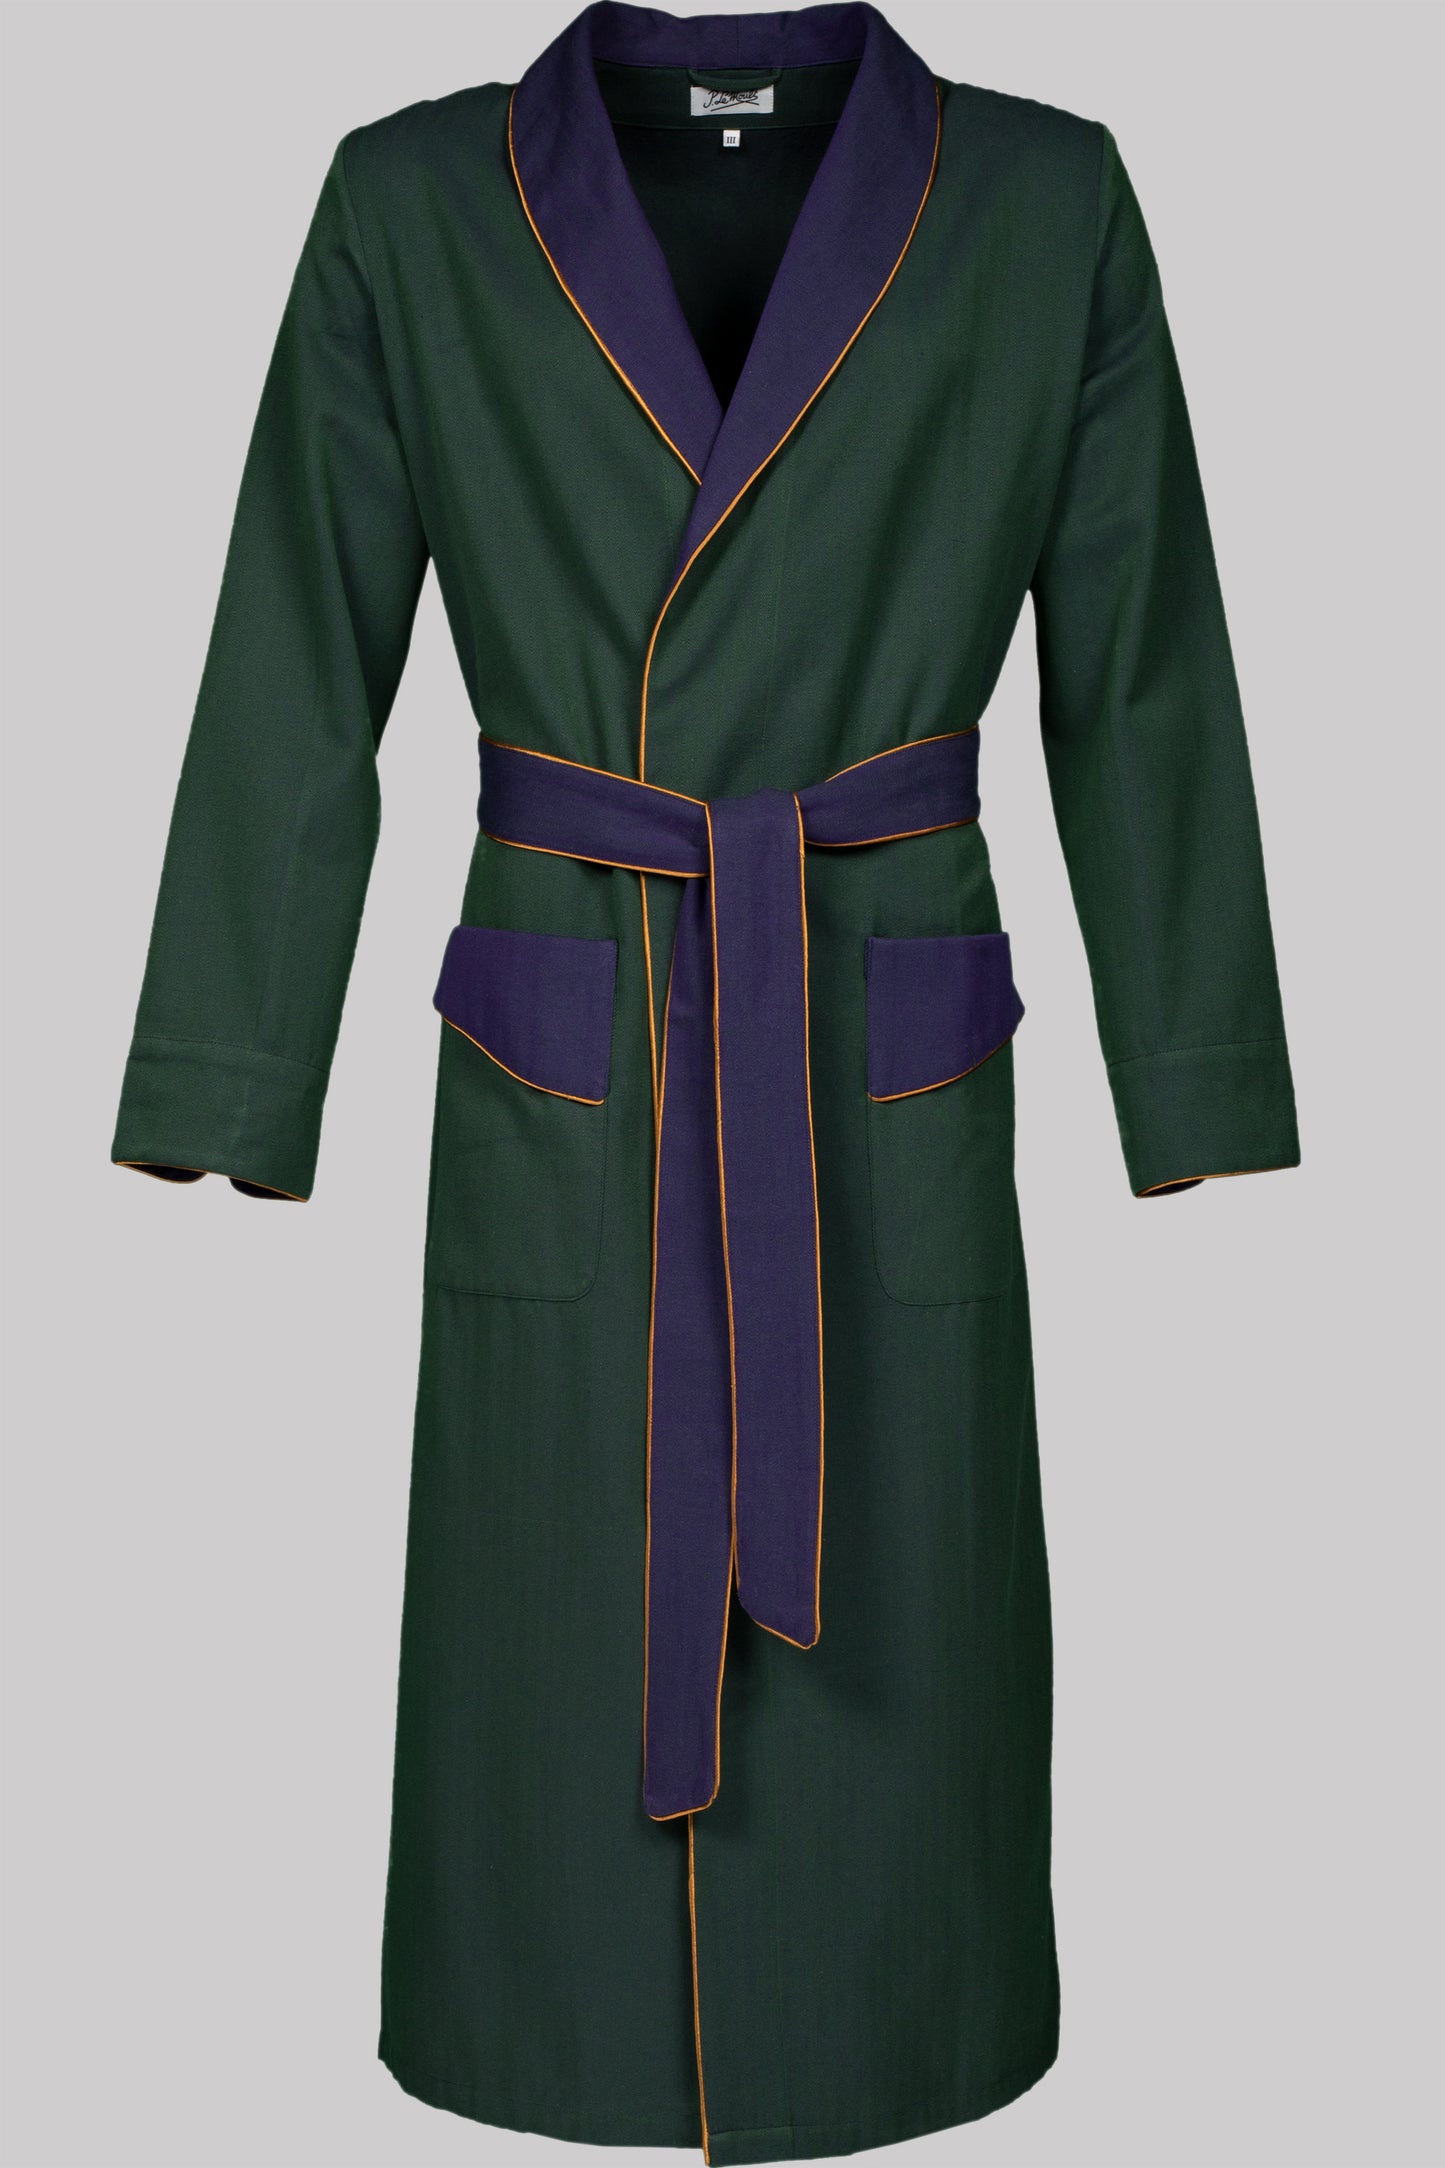 8990 DRESSING-GOWN PEACOCKGREEN-Peacockblue-gold